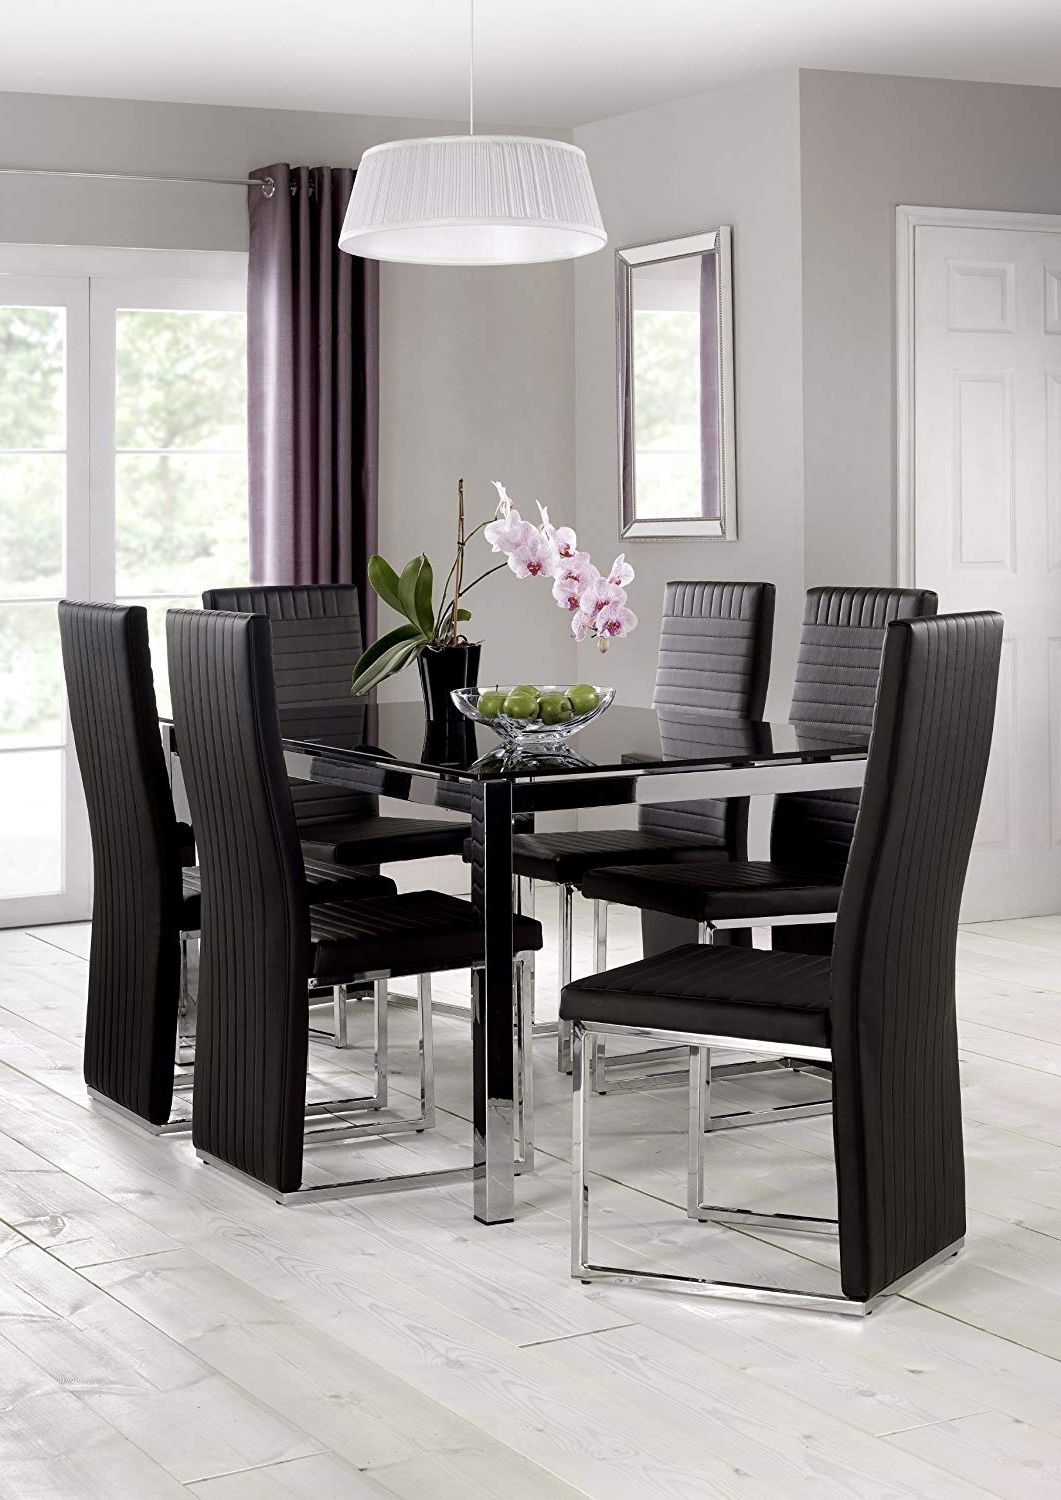 2017 Julian Bowen Tempo Glass Dining Table, Chrome/black: Amazon.co.uk Within 6 Chairs And Dining Tables (Photo 18 of 25)